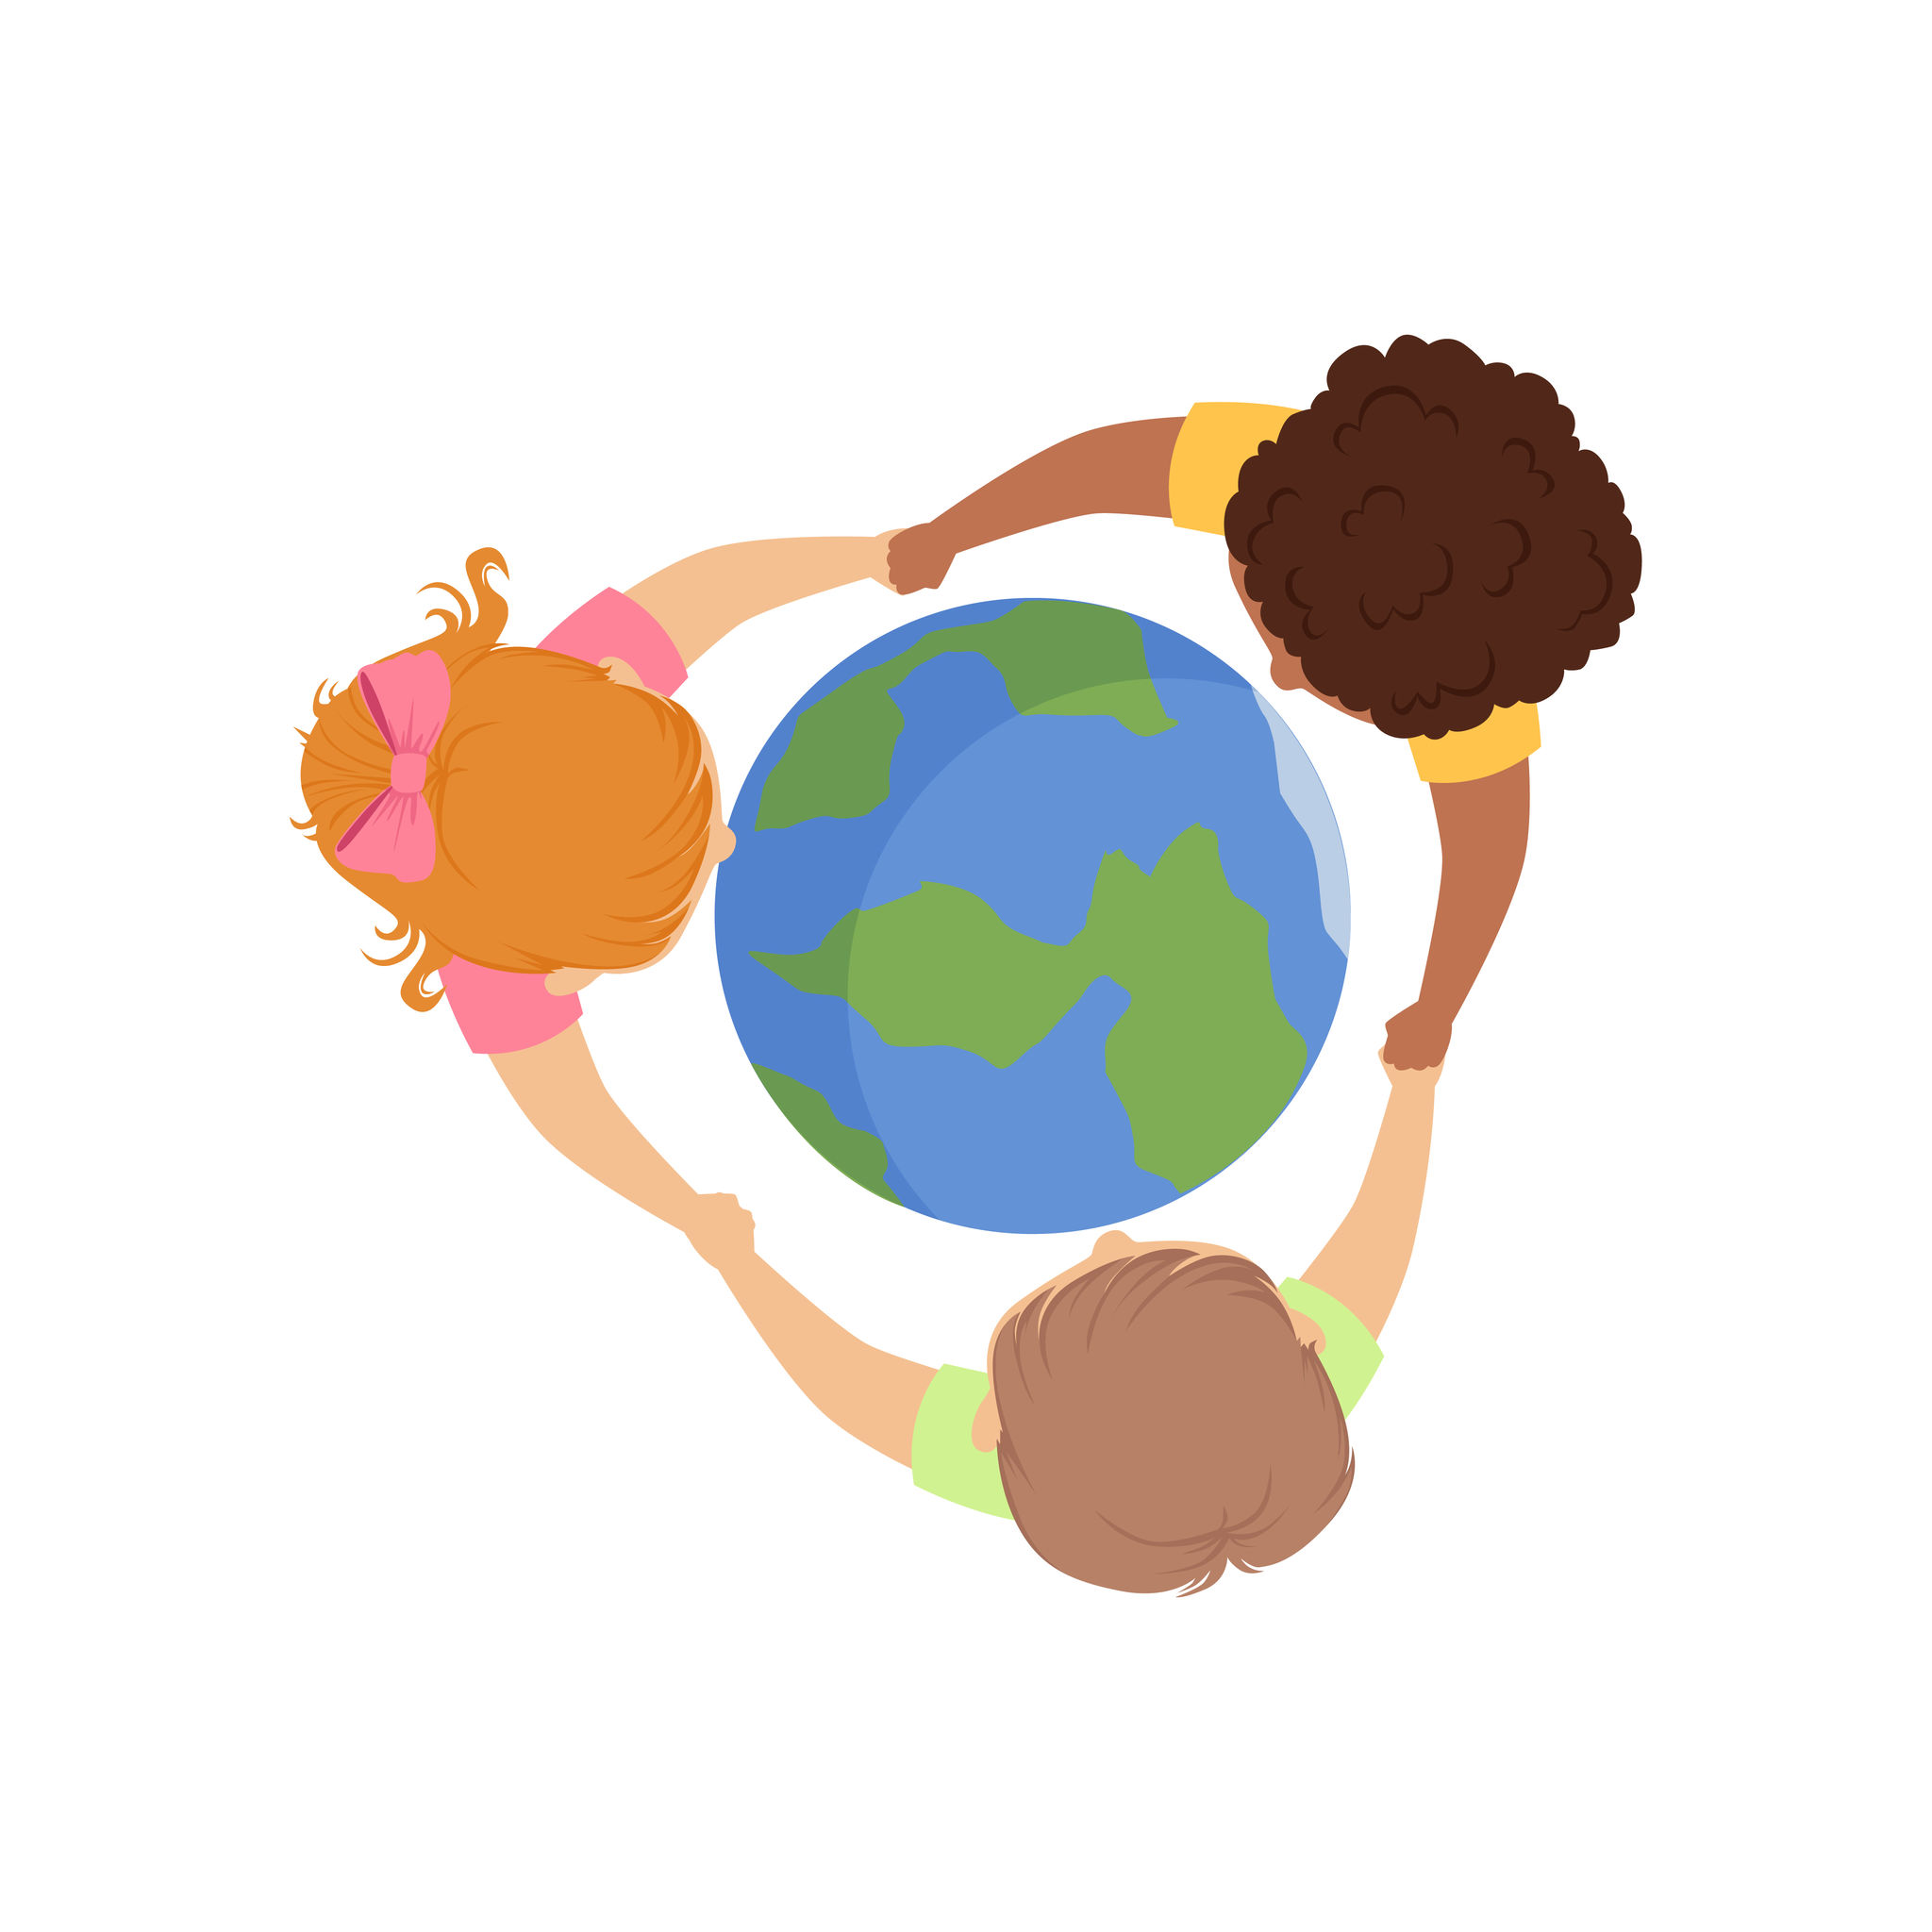 Image of three children of different races holding hands and forming  a circle around Earth